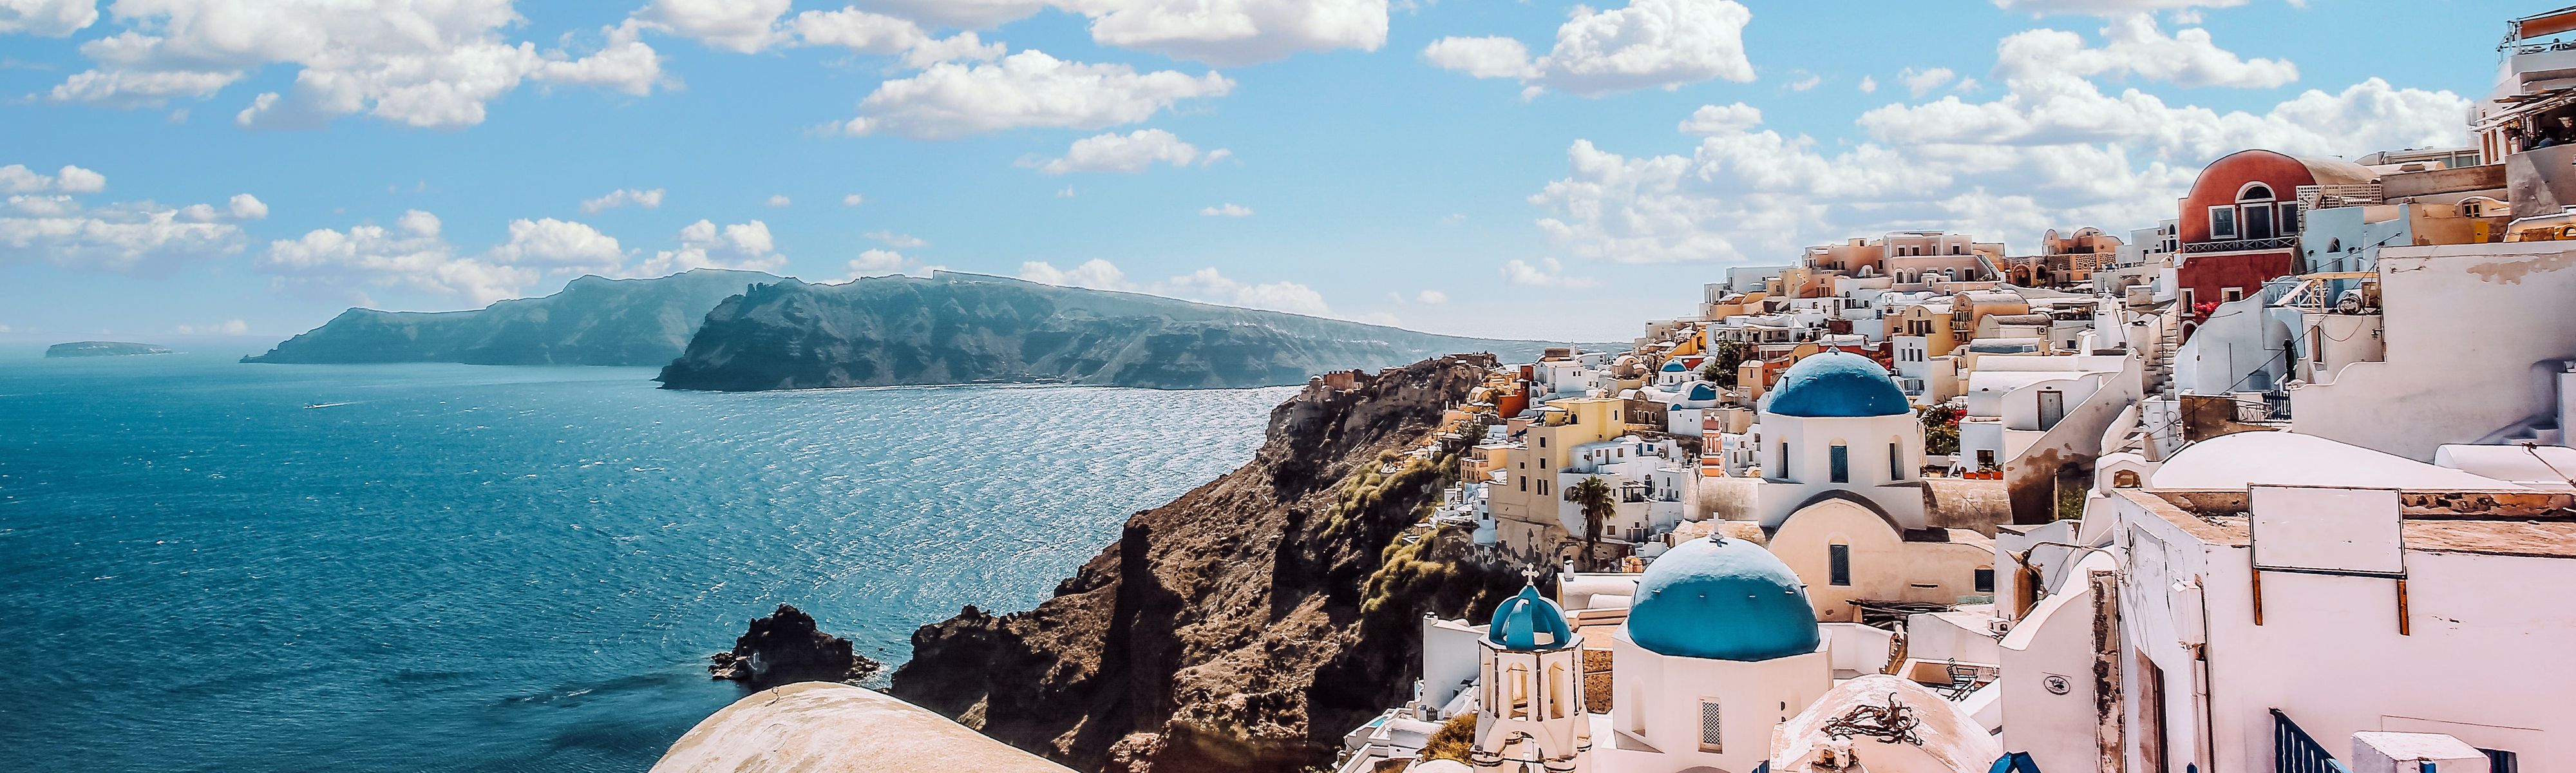 blue domed buildings along the cliffs of santorini in greece